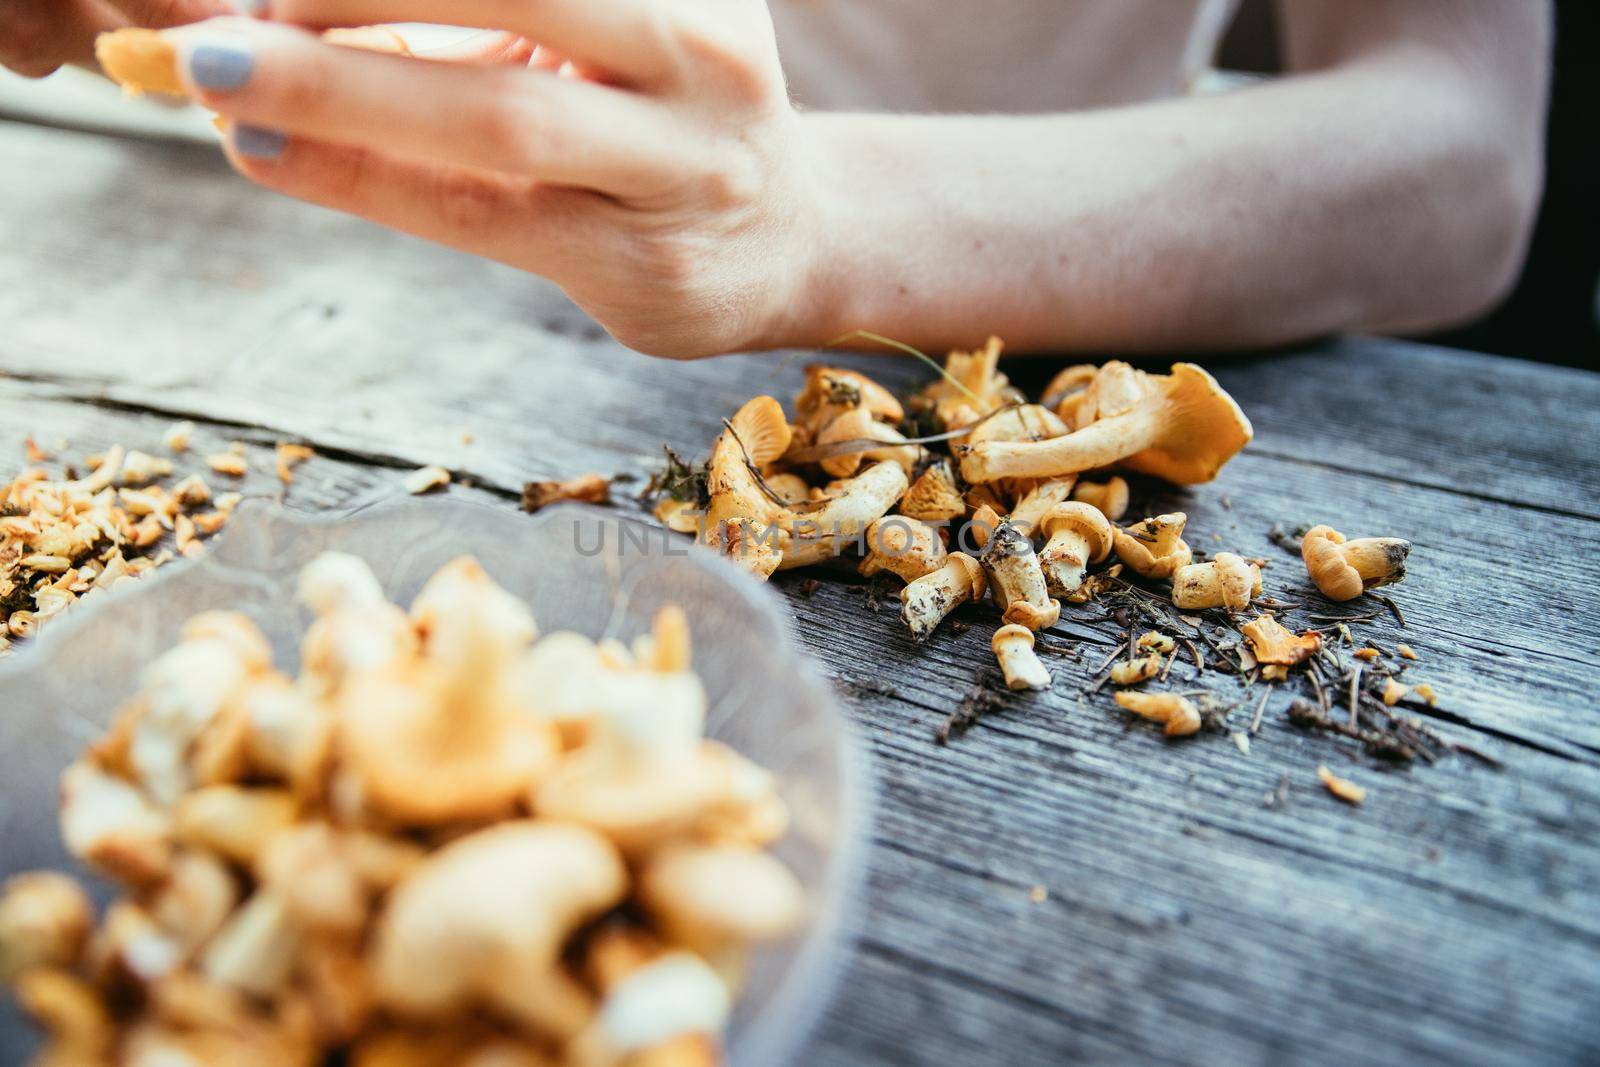 Preparing chanterelle mushrooms on an old rustic wooden table